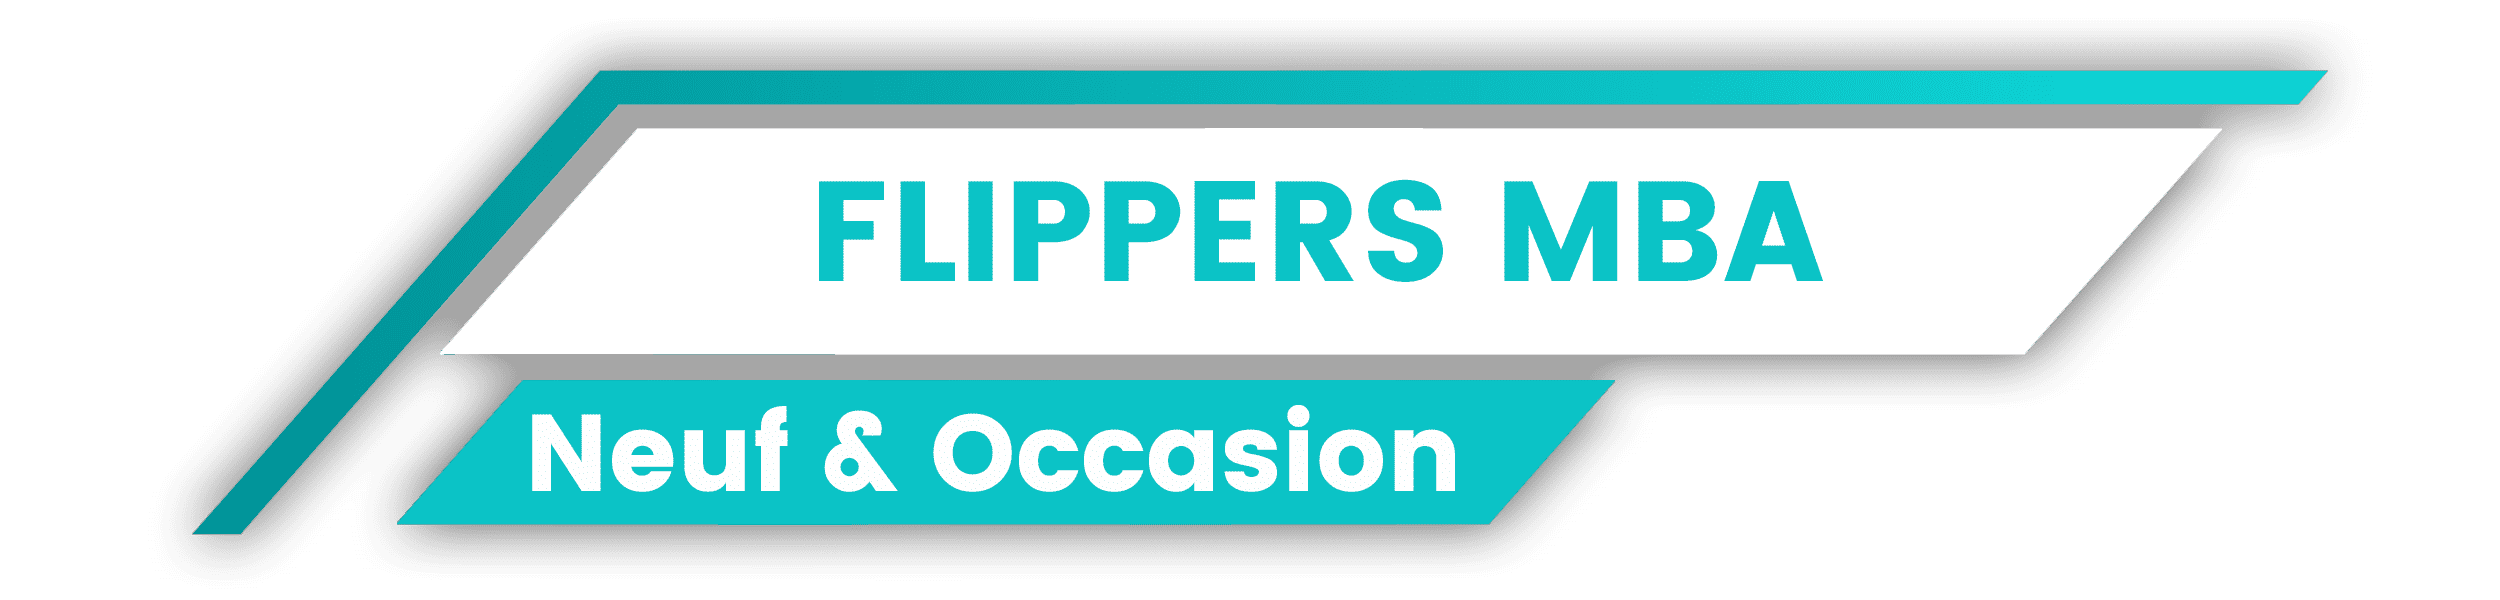 LES FLIPPERS MBA